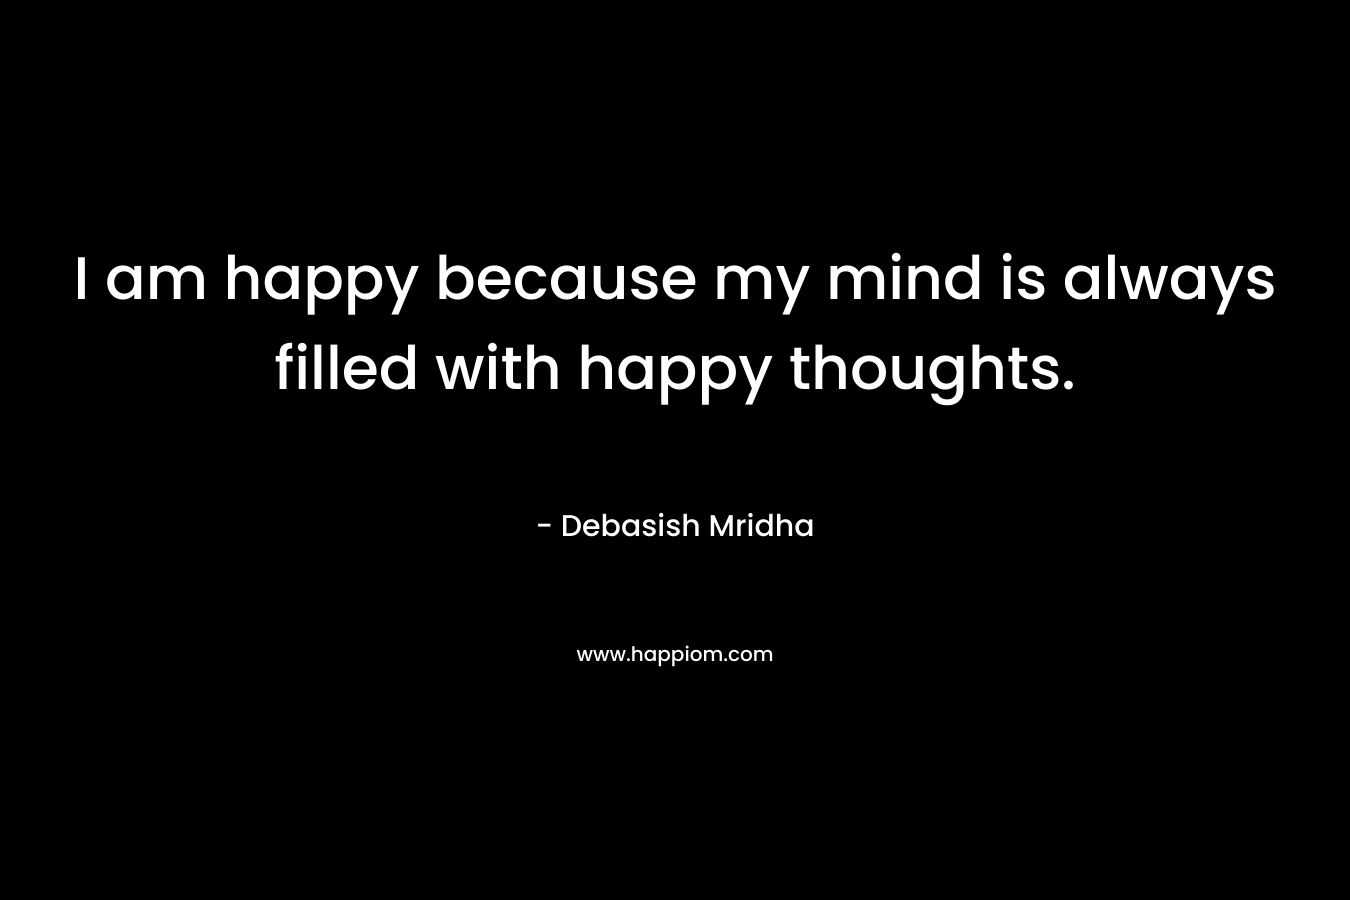 I am happy because my mind is always filled with happy thoughts.